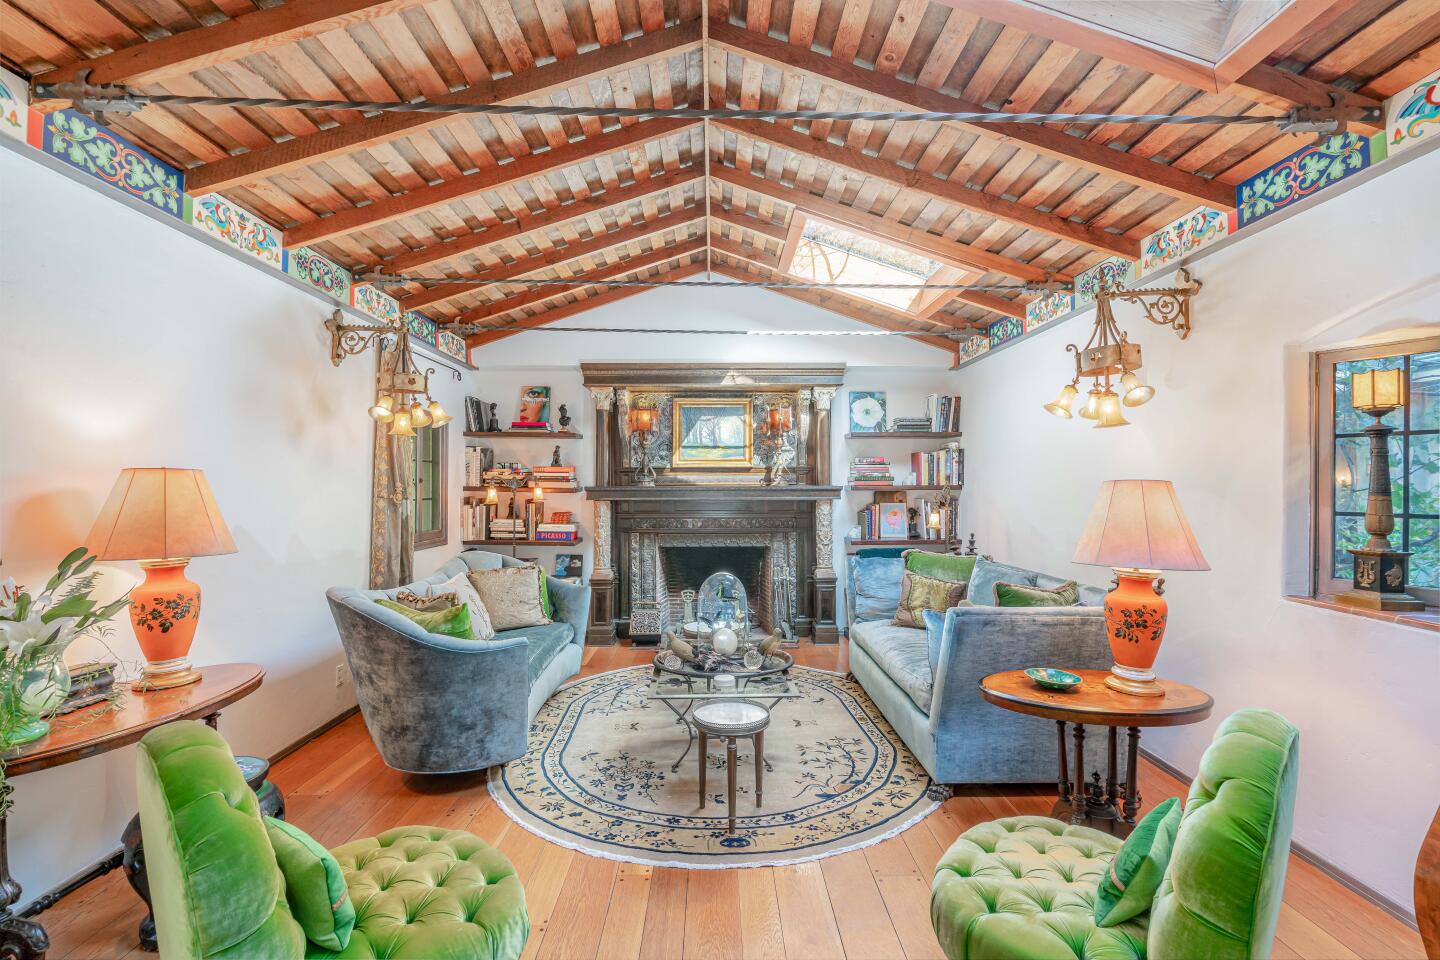 An ornate fireplace and vaulted ceilings are among features in the great room.